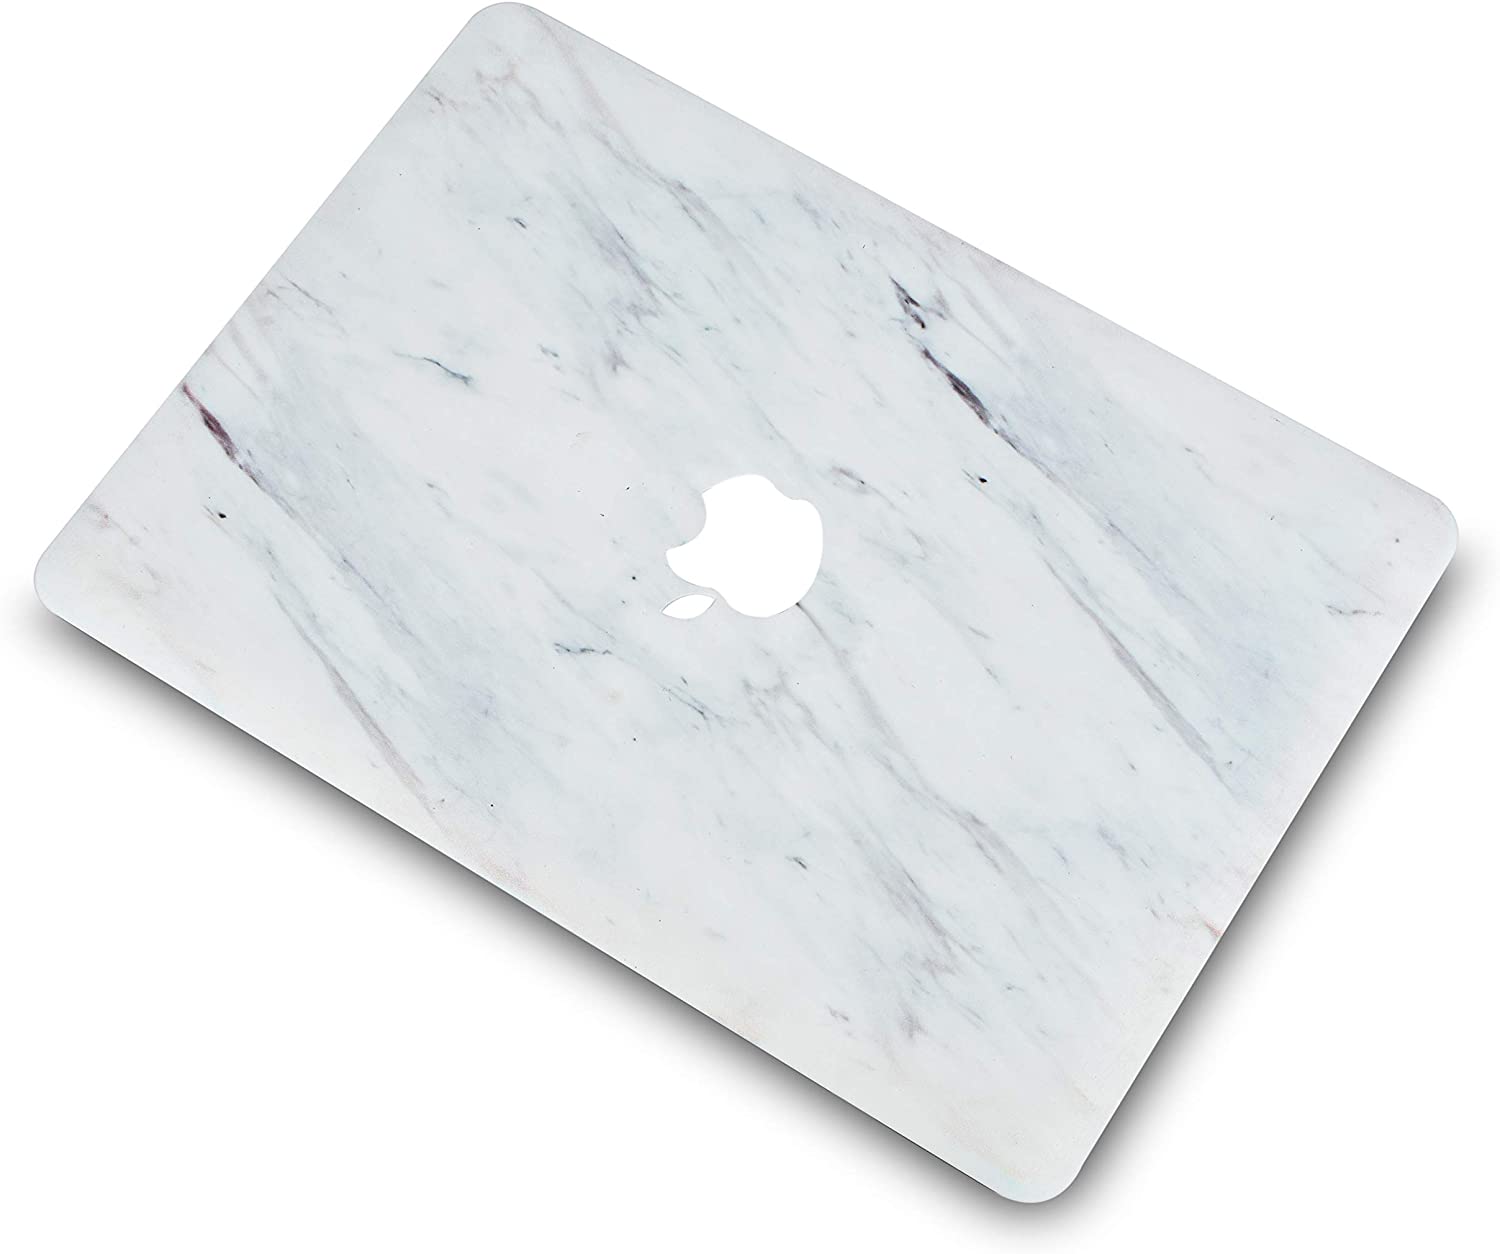 SILK WHITE MARBLE - MacBook Air 13 inch Case 2018 - 2020 Release. Plastic Pattern Hard Shell keyboard & screen protectors Compatible with MacBook Air 13. - e4cents